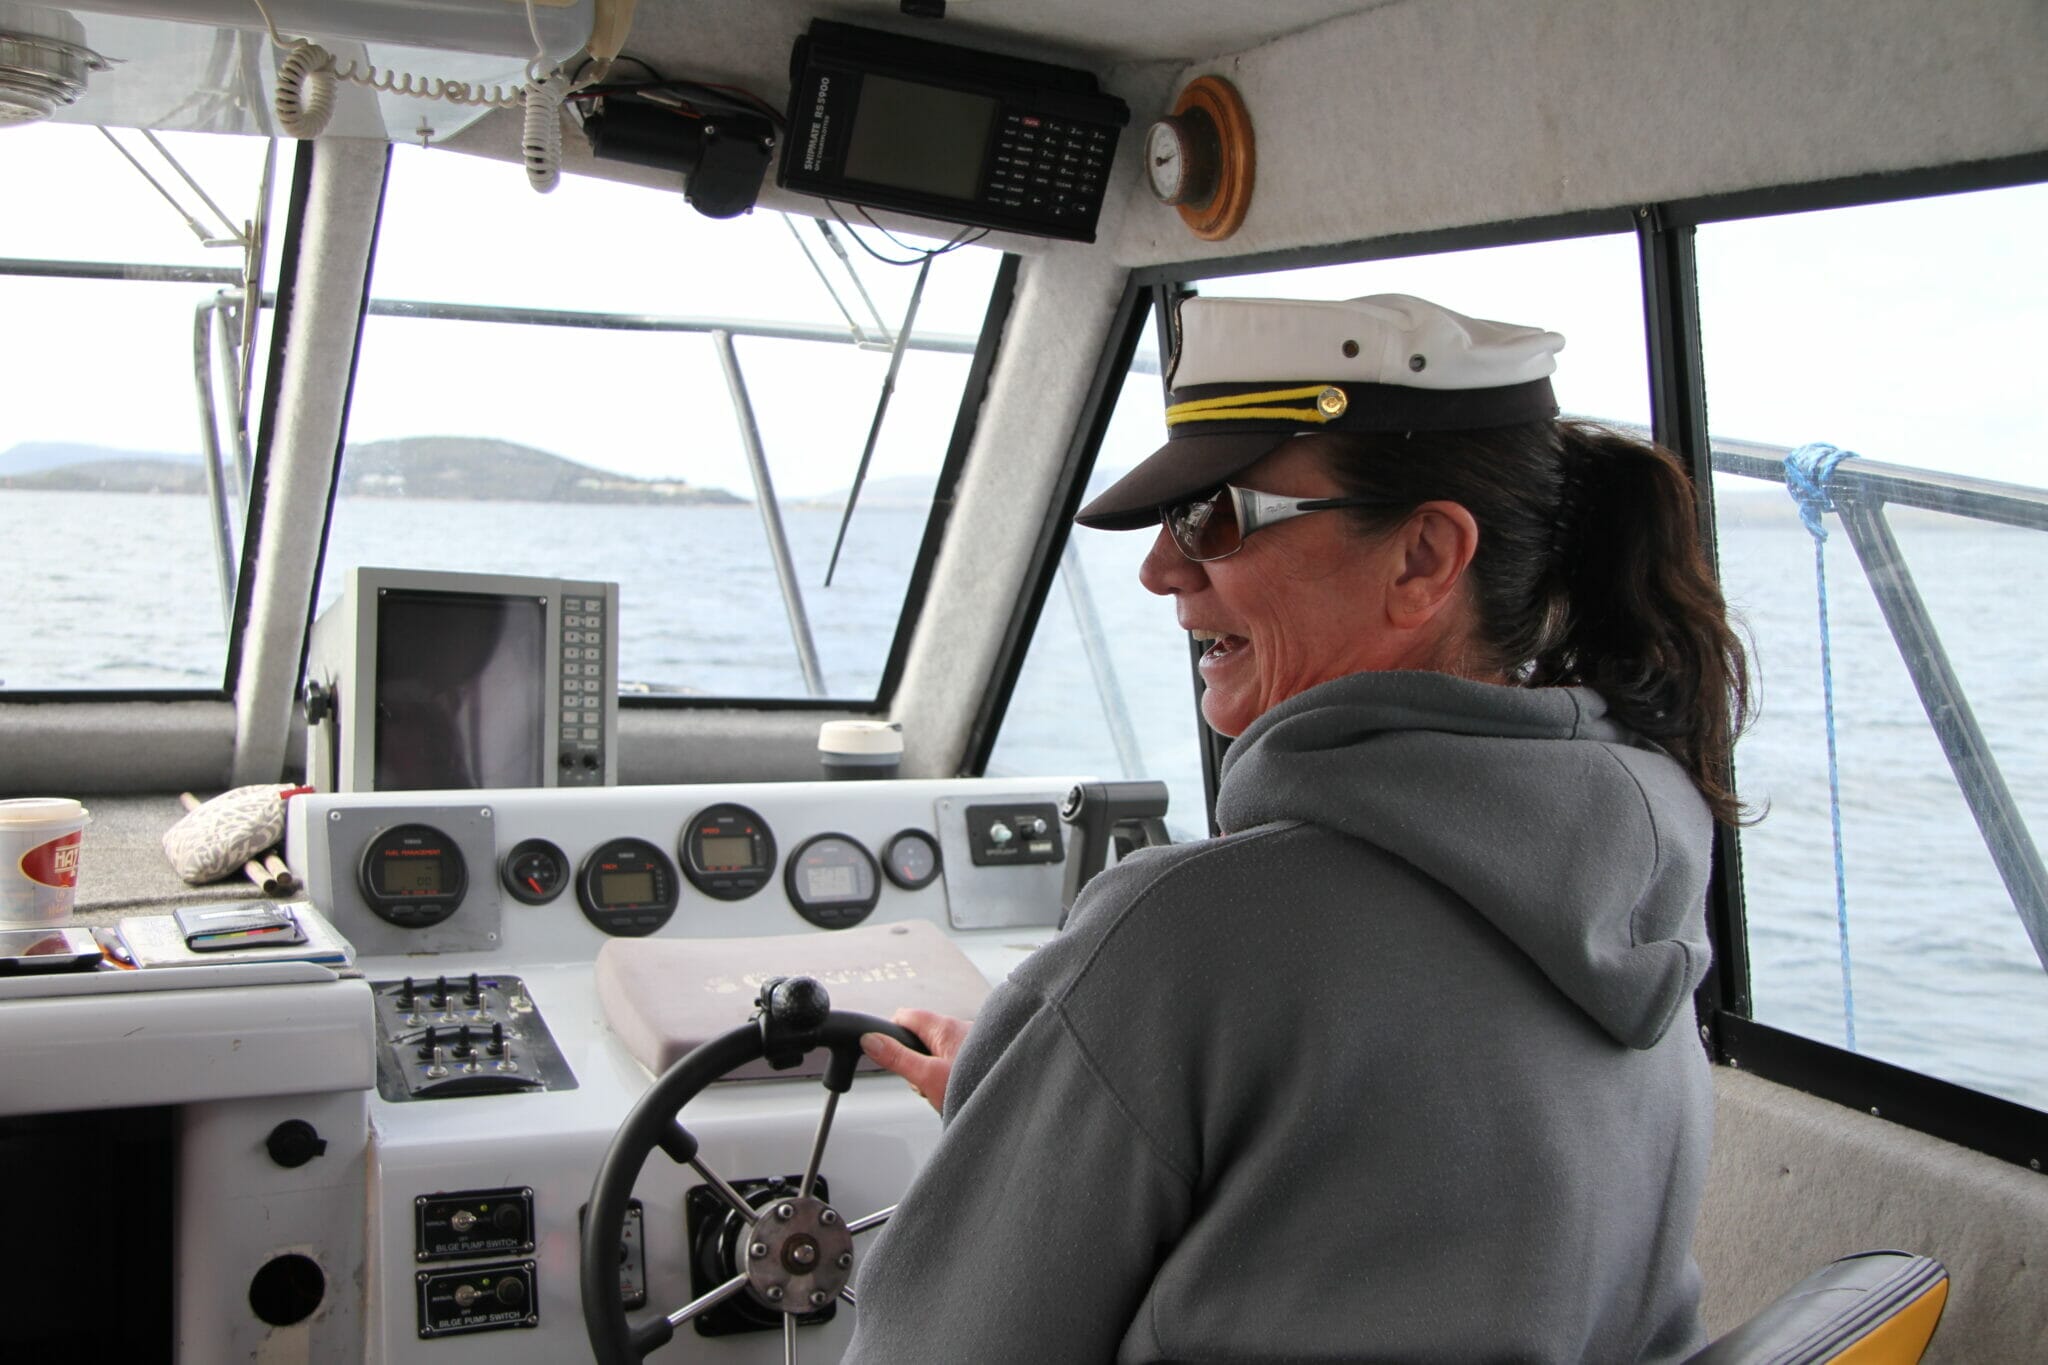 Captain of the day - One of our guests at the helm of the Young Salty Dog